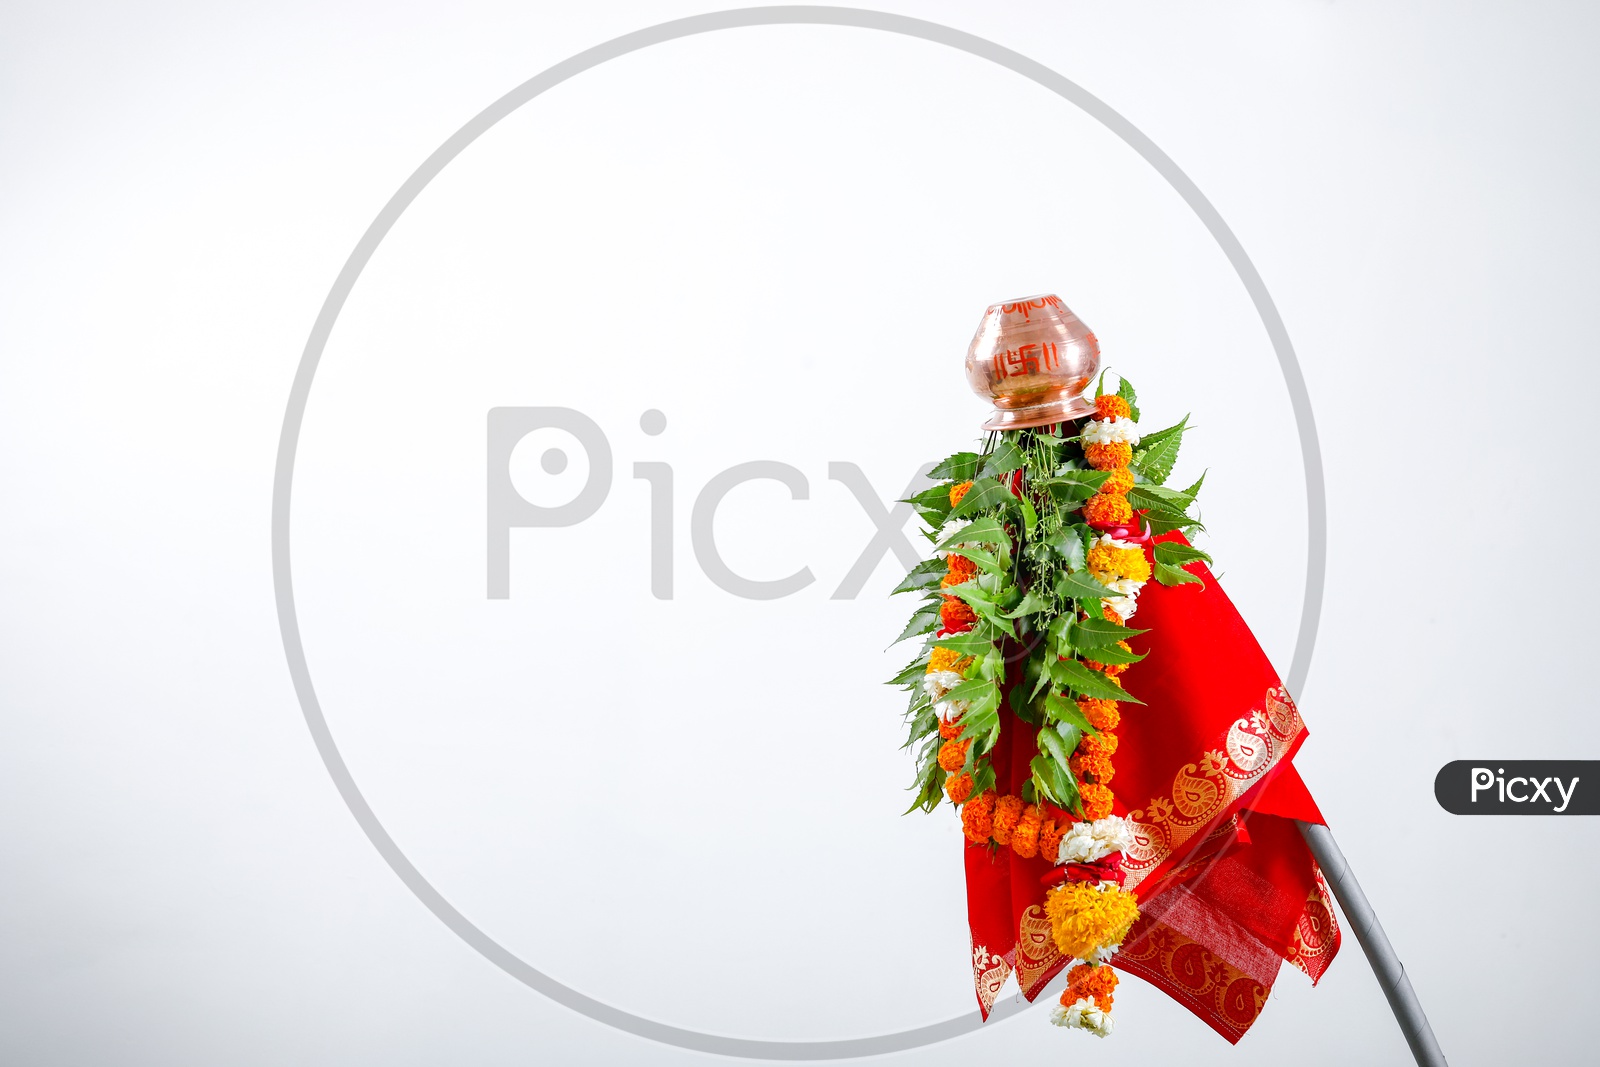 Gudi Padwa  Marathi New Year  Wishes Template  With Spacing on an Isolated White Background